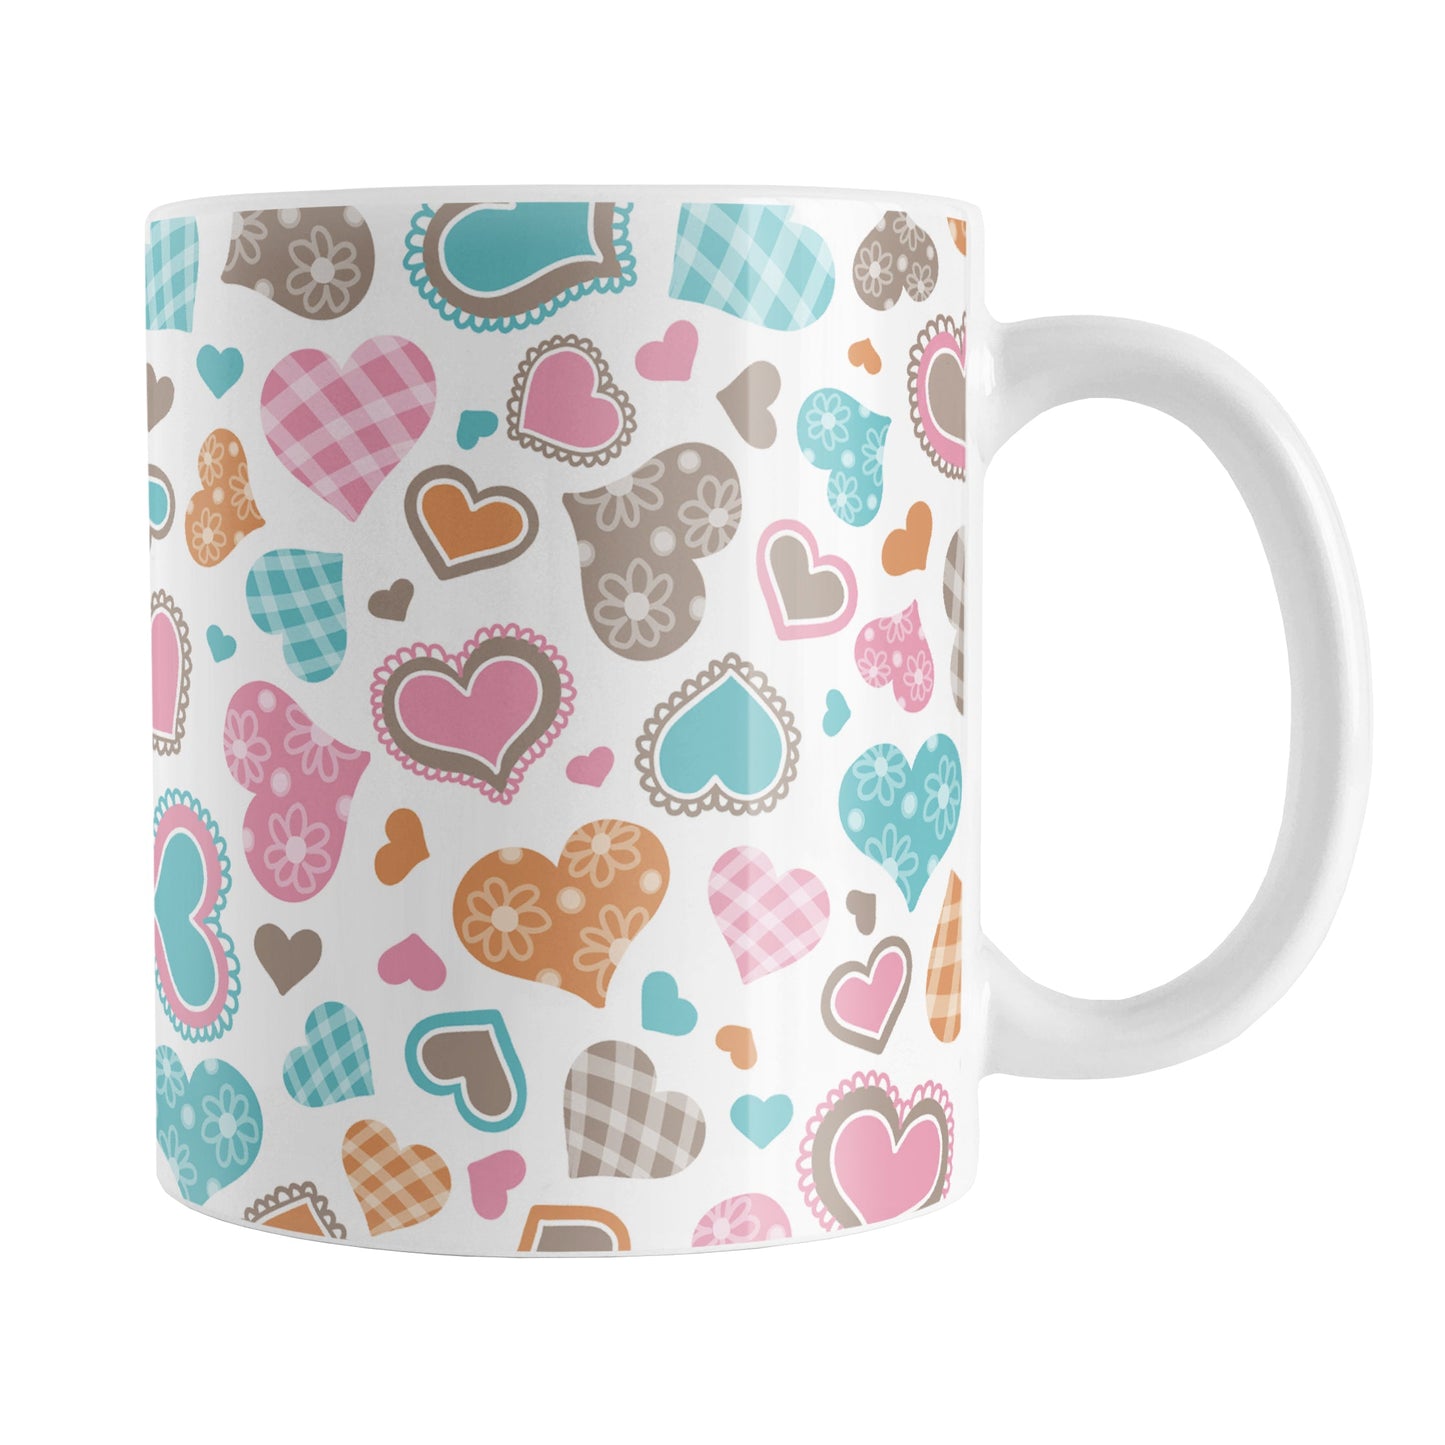 Cutesy Hearts Pattern Mug (11oz) at Amy's Coffee Mugs. This ceramic coffee mug is designed with adorable little hearts in pink, turquoise, orange, and brown. This pattern of cute hearts wraps around the mug to the handle.